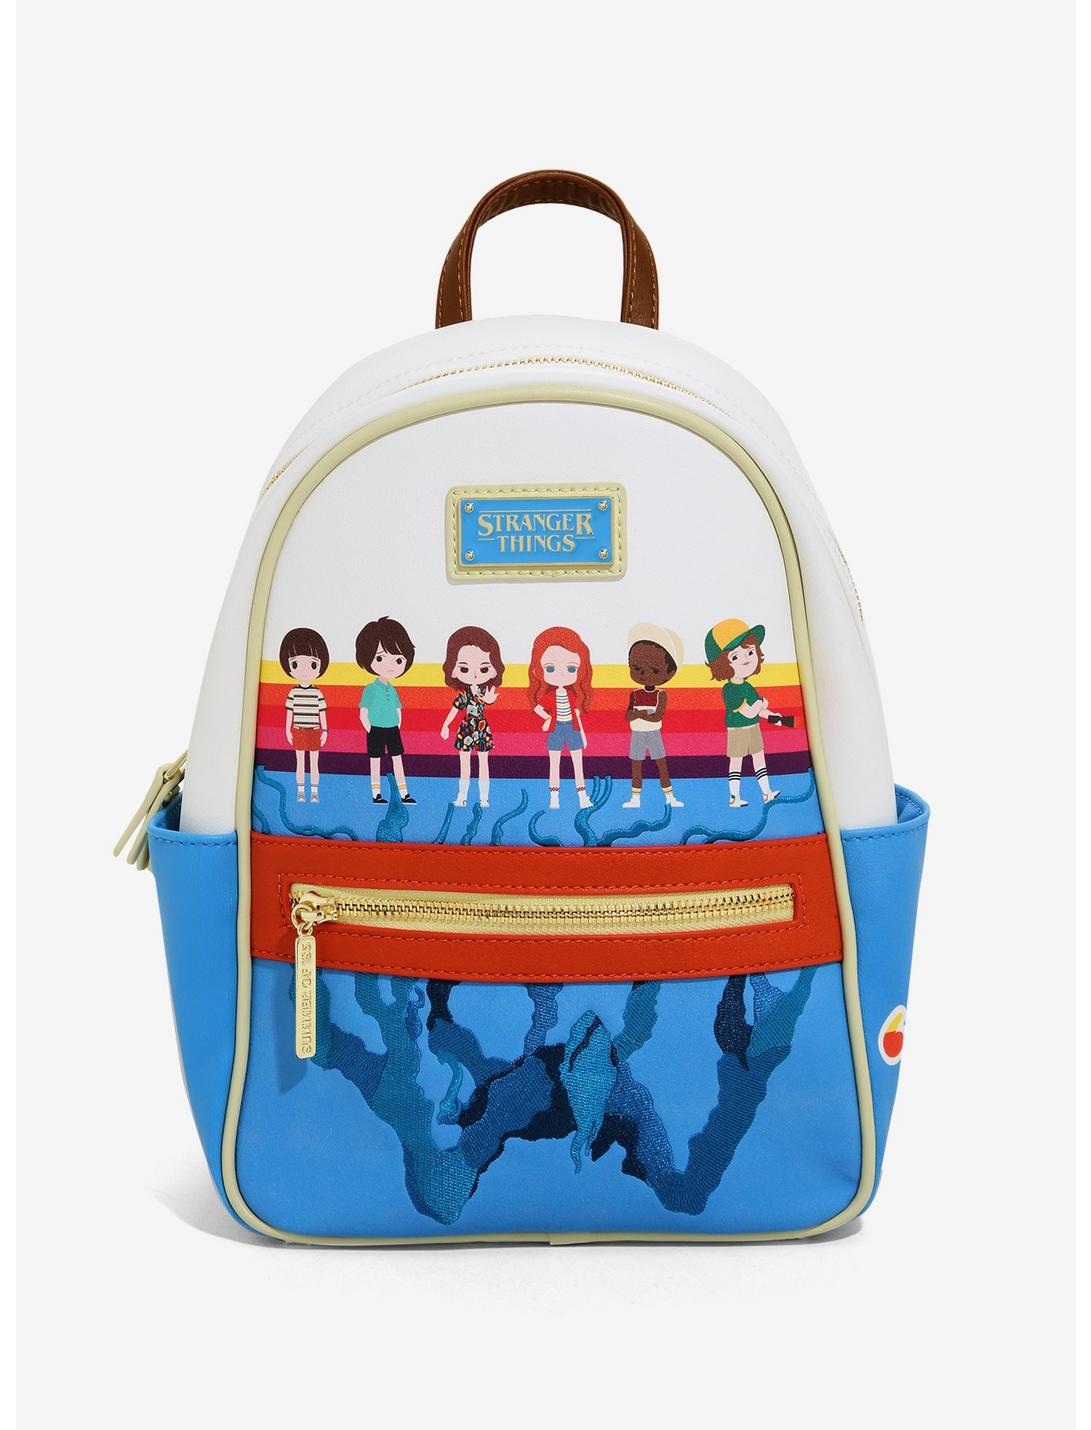 Loungefly Stranger Things Chibi Mini Backpack - 2019 Summer Convention Exclusive, , hi-res